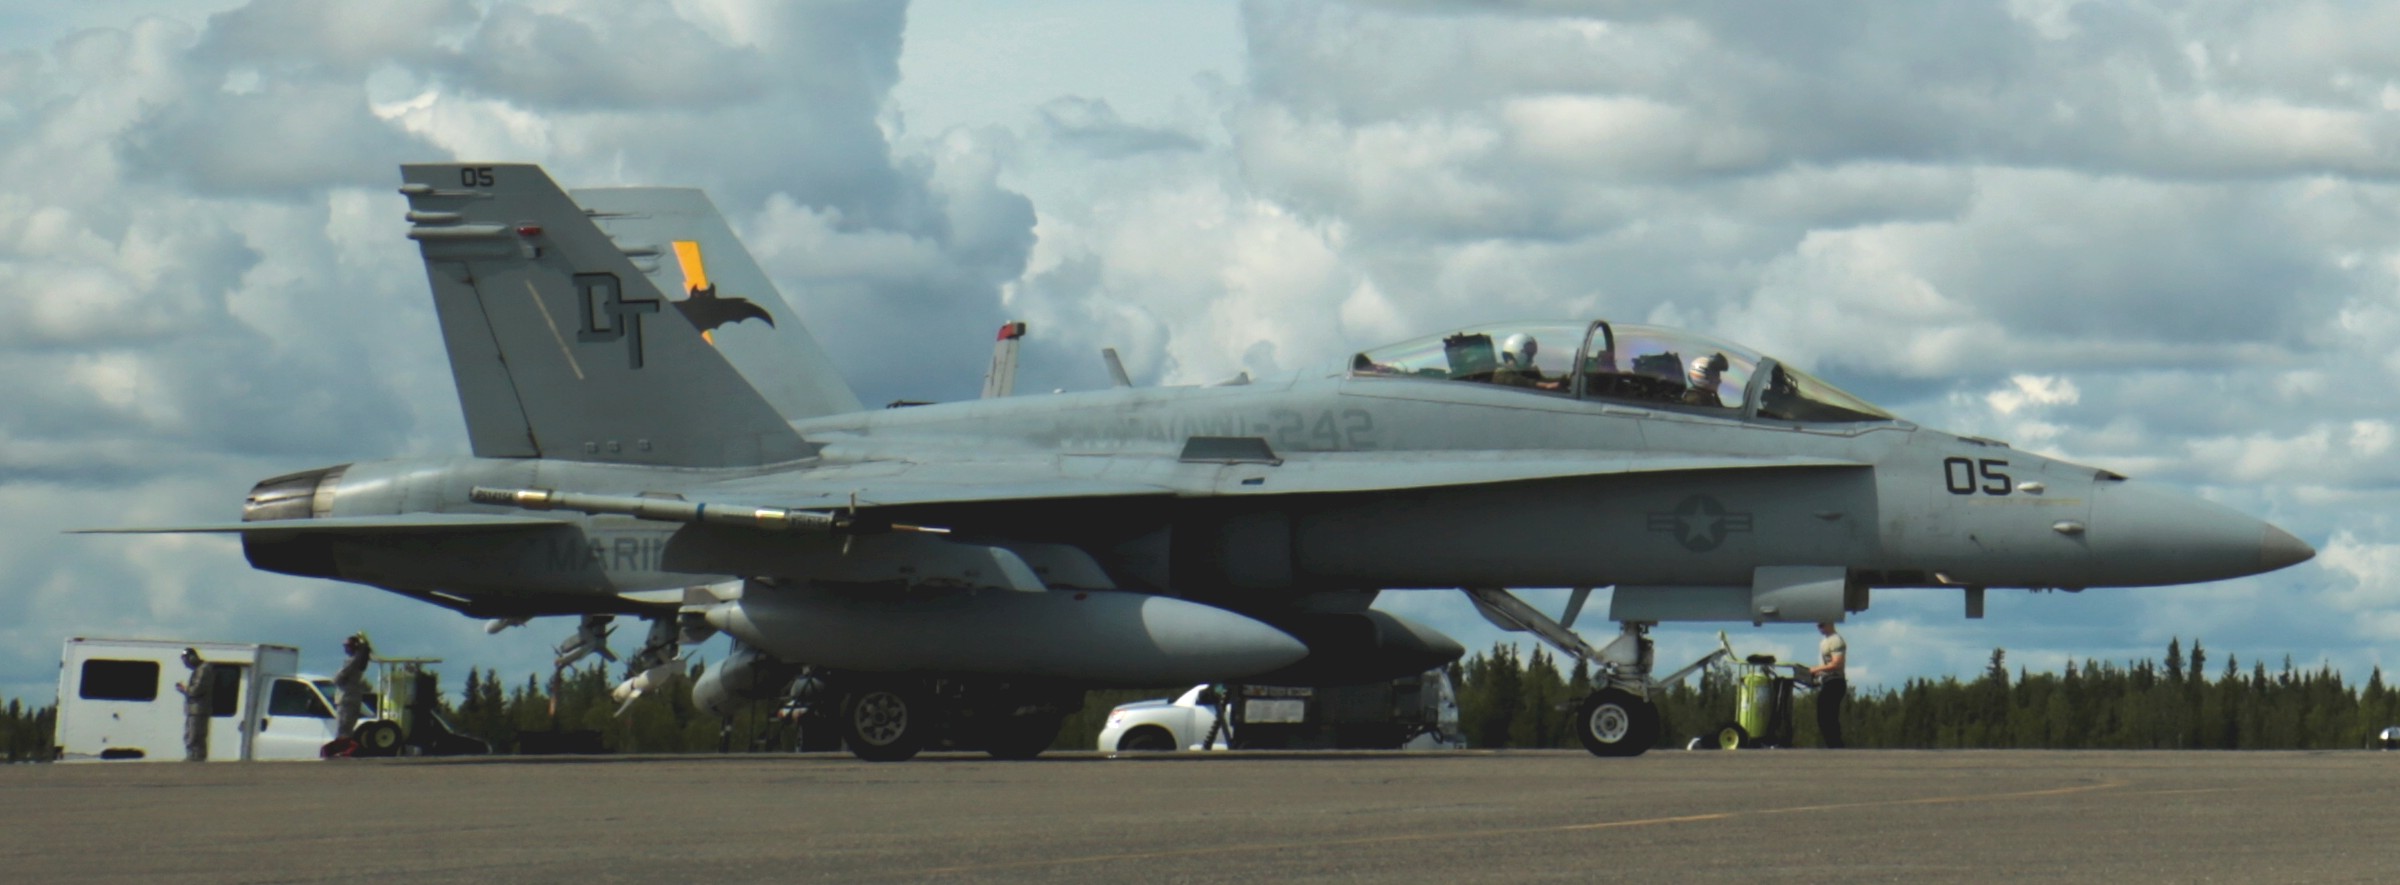 vmfa(aw)-242 bats marine all-weather fighter attack squadron usmc f/a-18d hornet 58